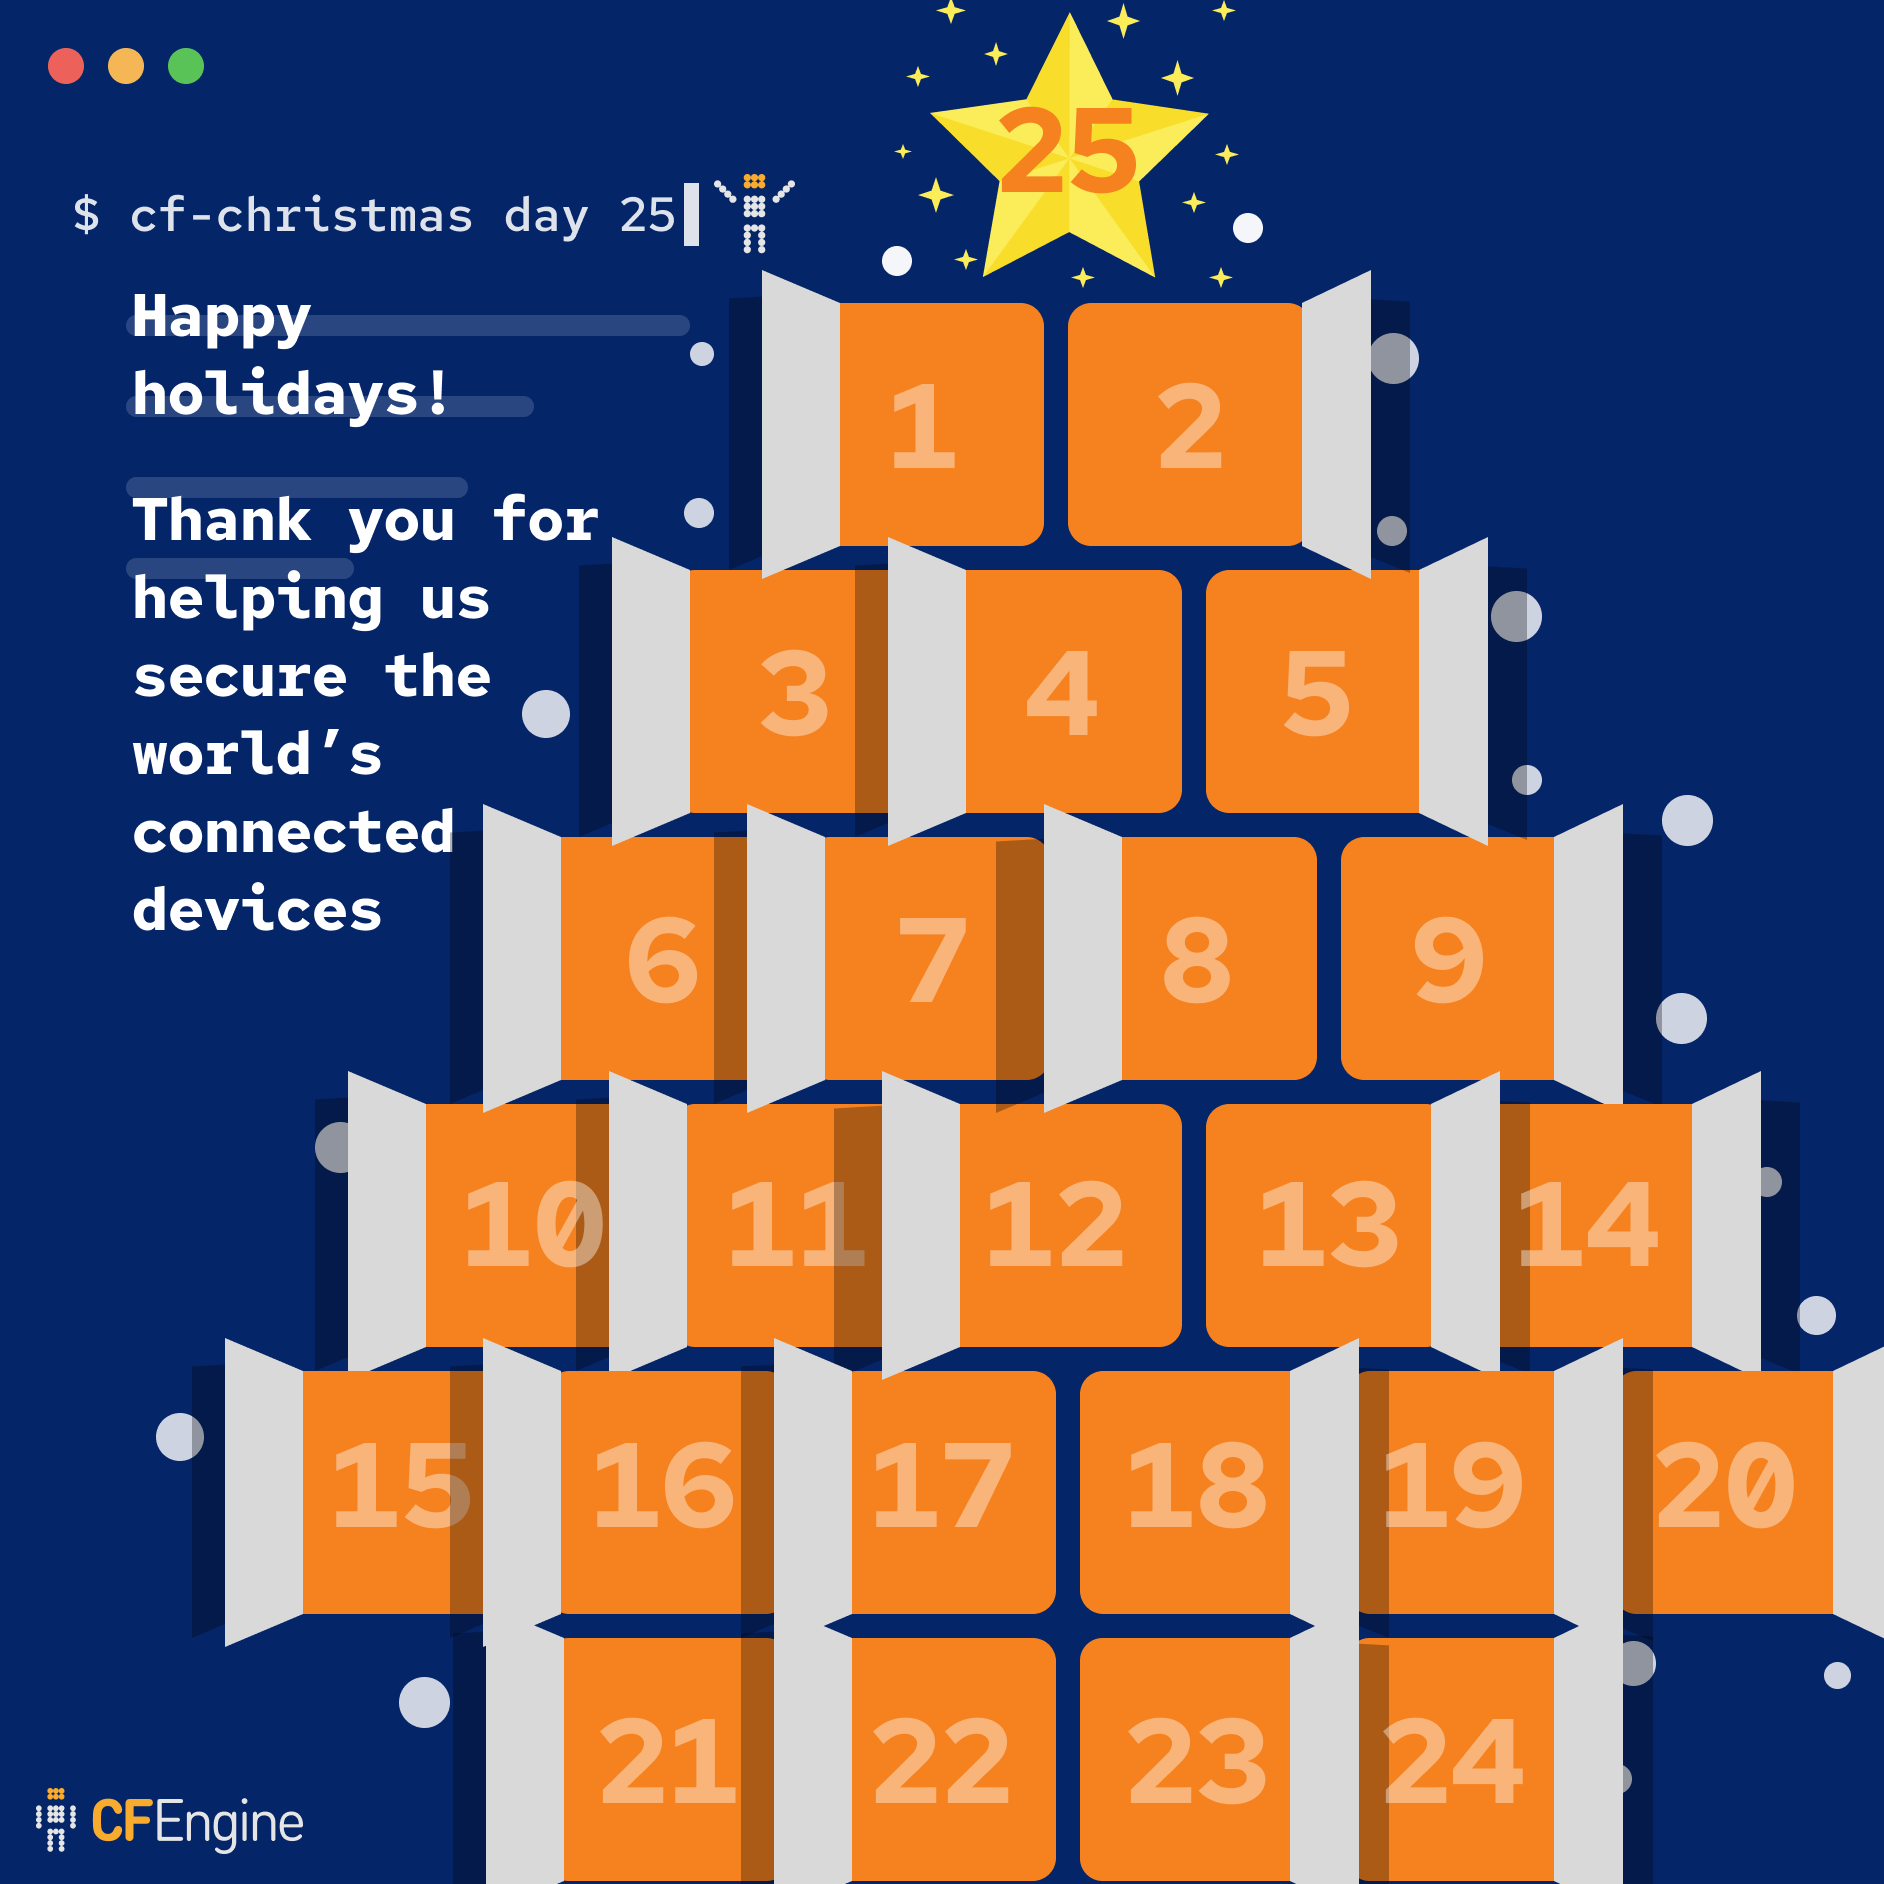 Happy holidays! Thank you for helping us secure the world's connected devices